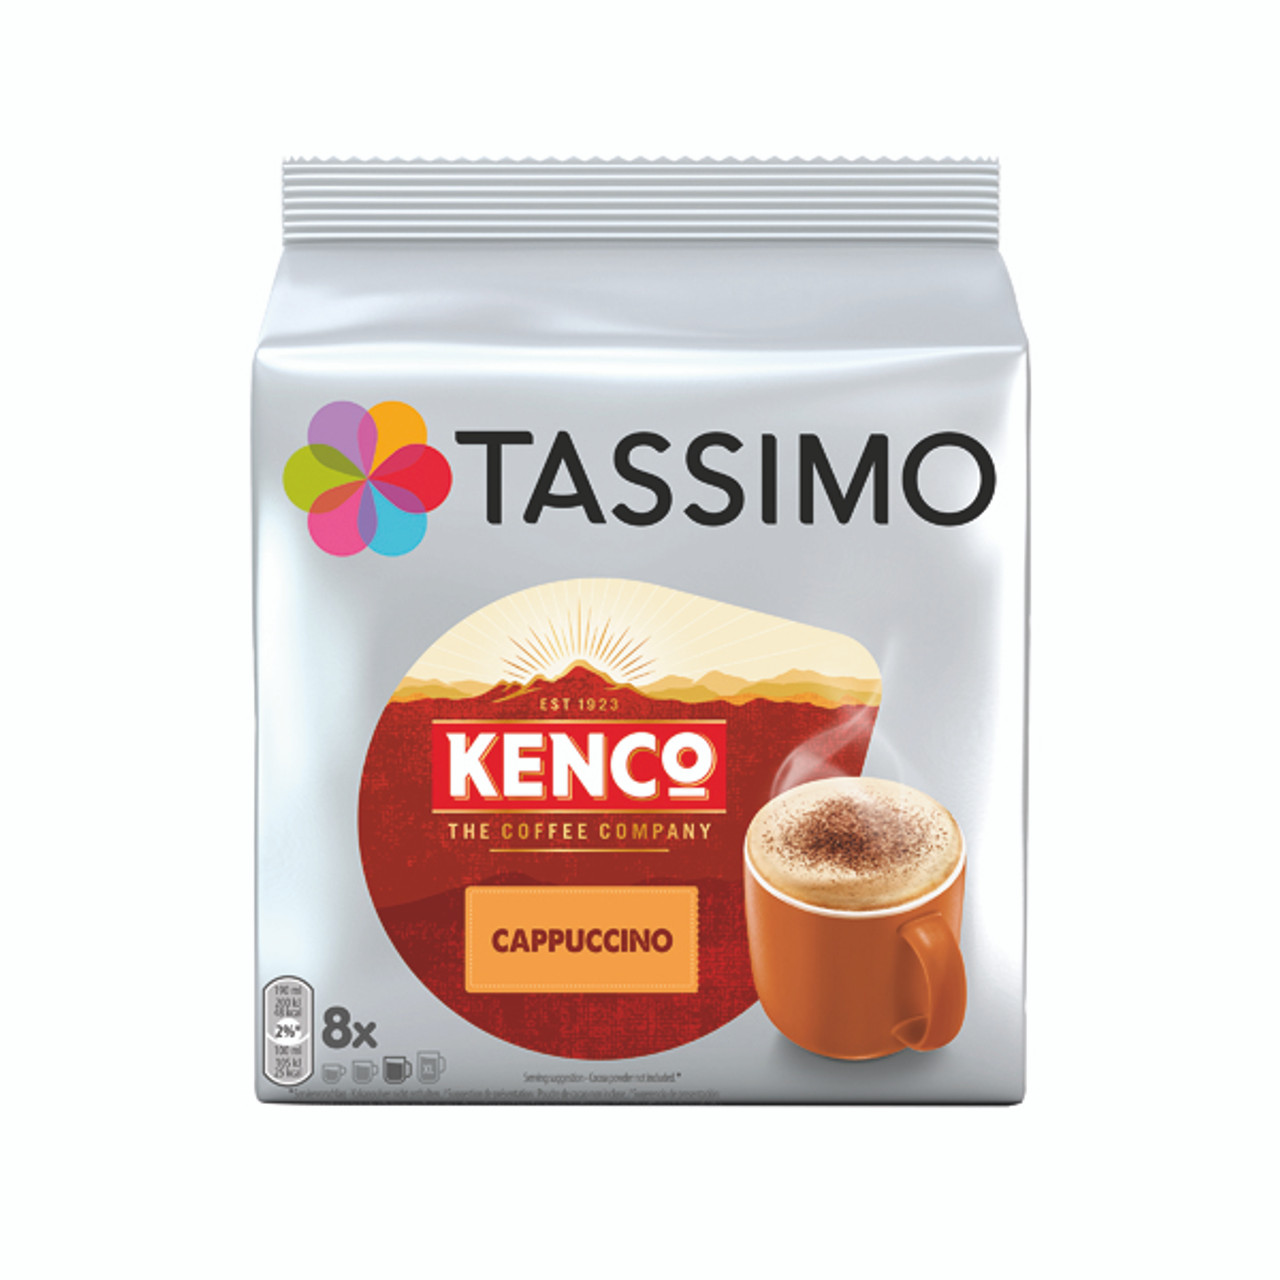 Tassimo Kenco Cappuccino Pods (Pack of 40) 4041300 - Supplies for